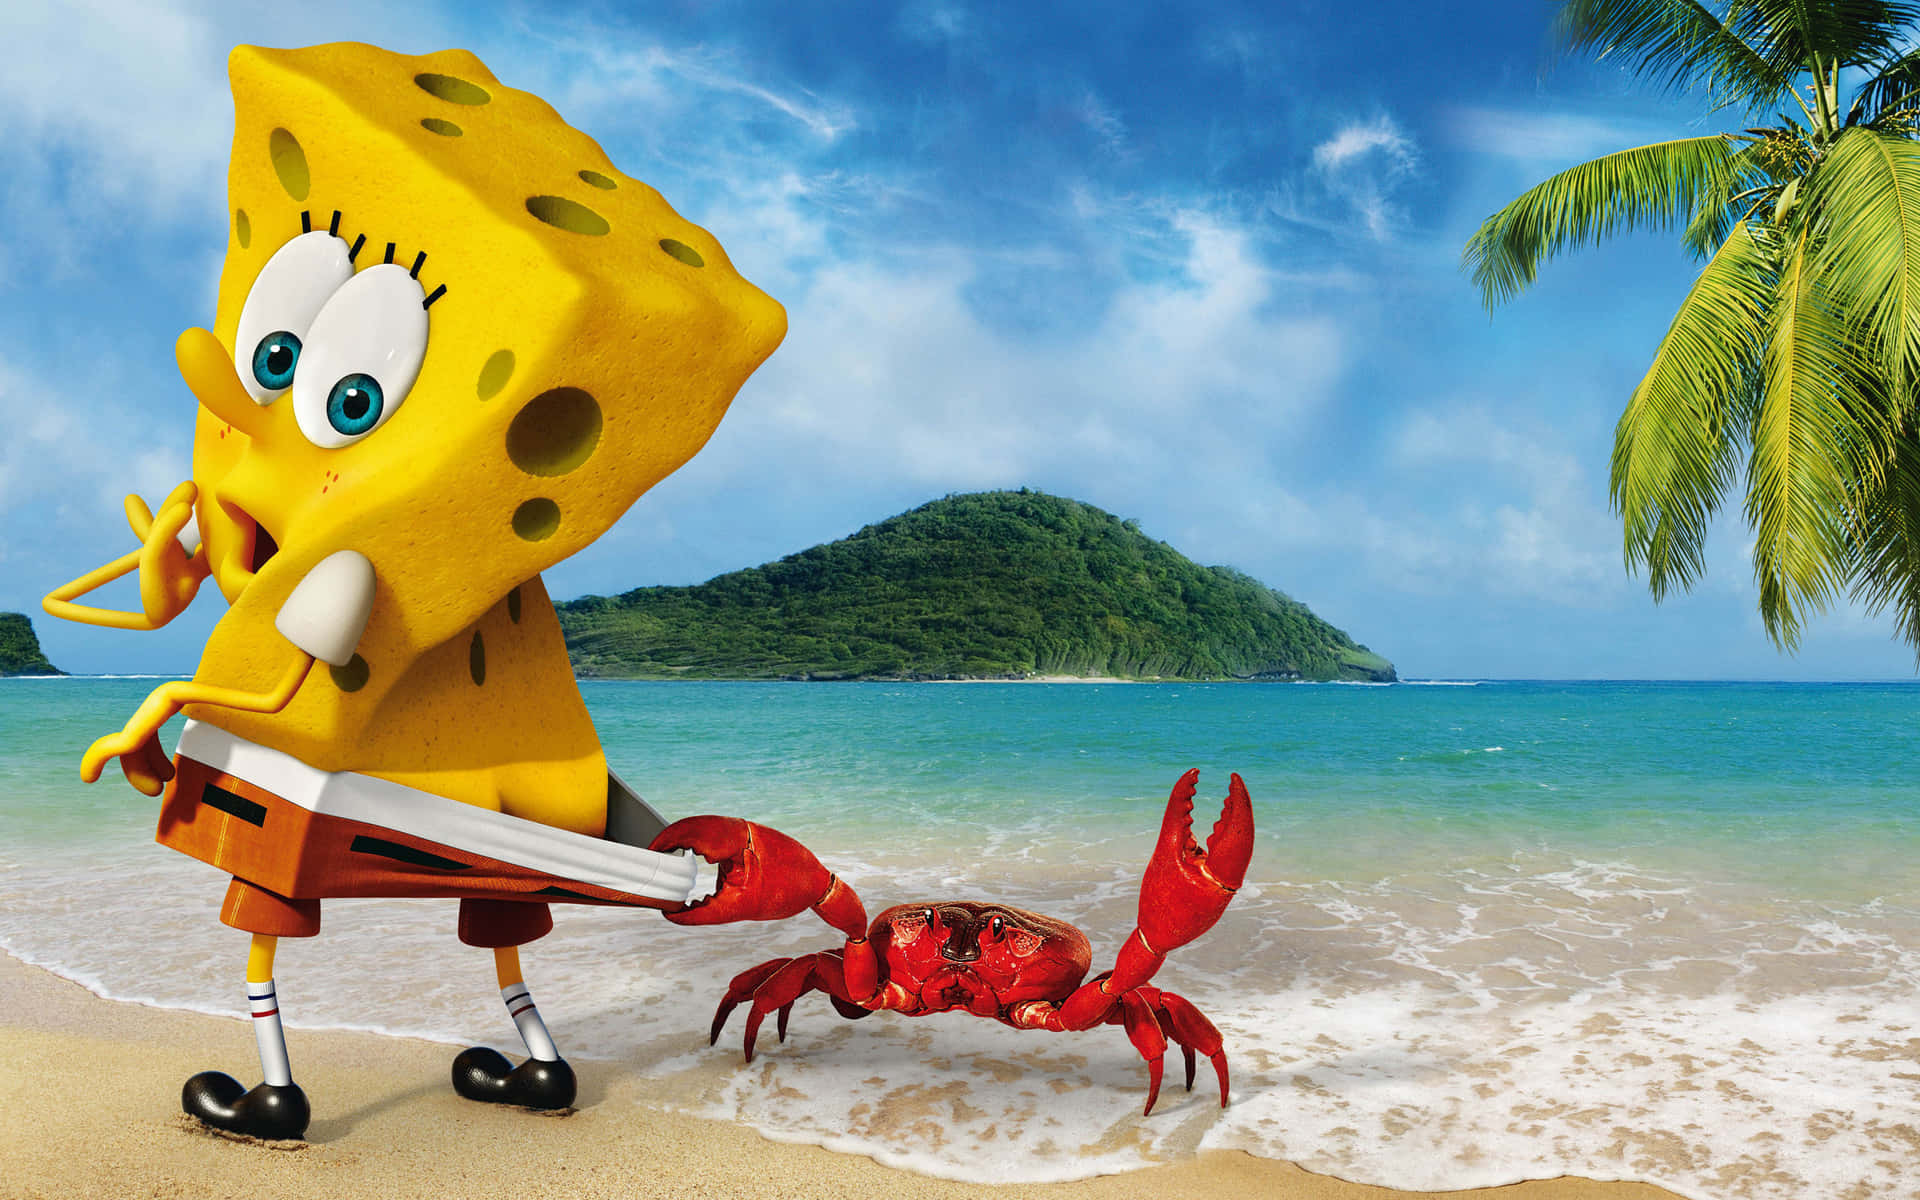 “There’s no day like a Spongebob Squarepants day!”